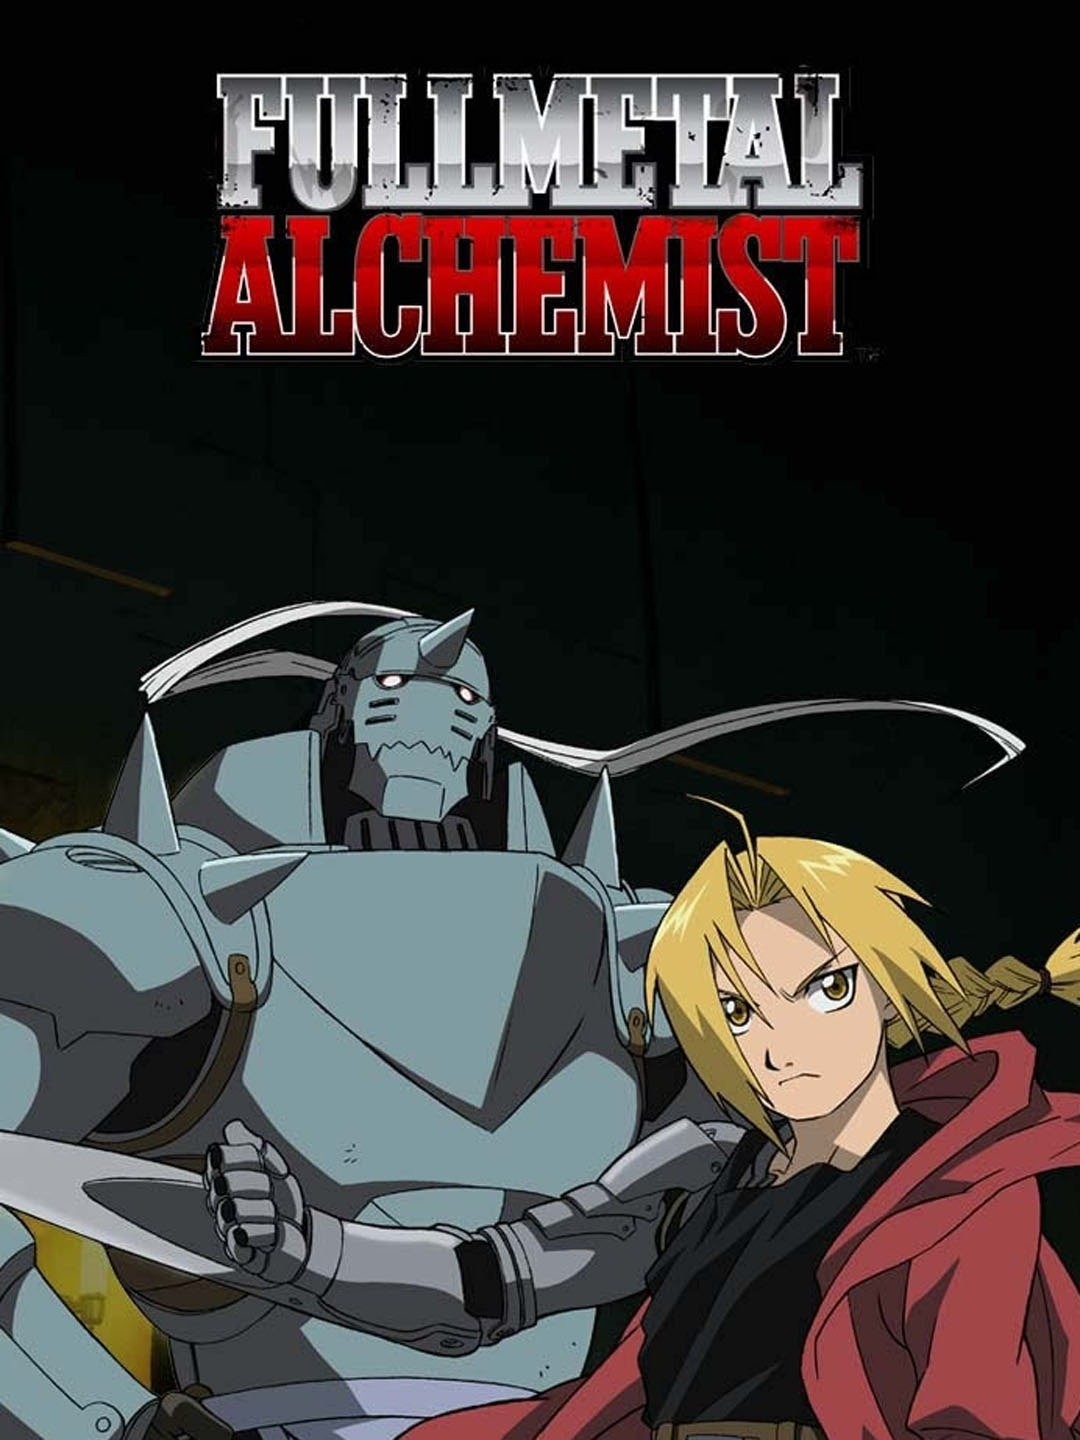 The Fullmetal Alchemist (2003) Anime is a Masterpiece of